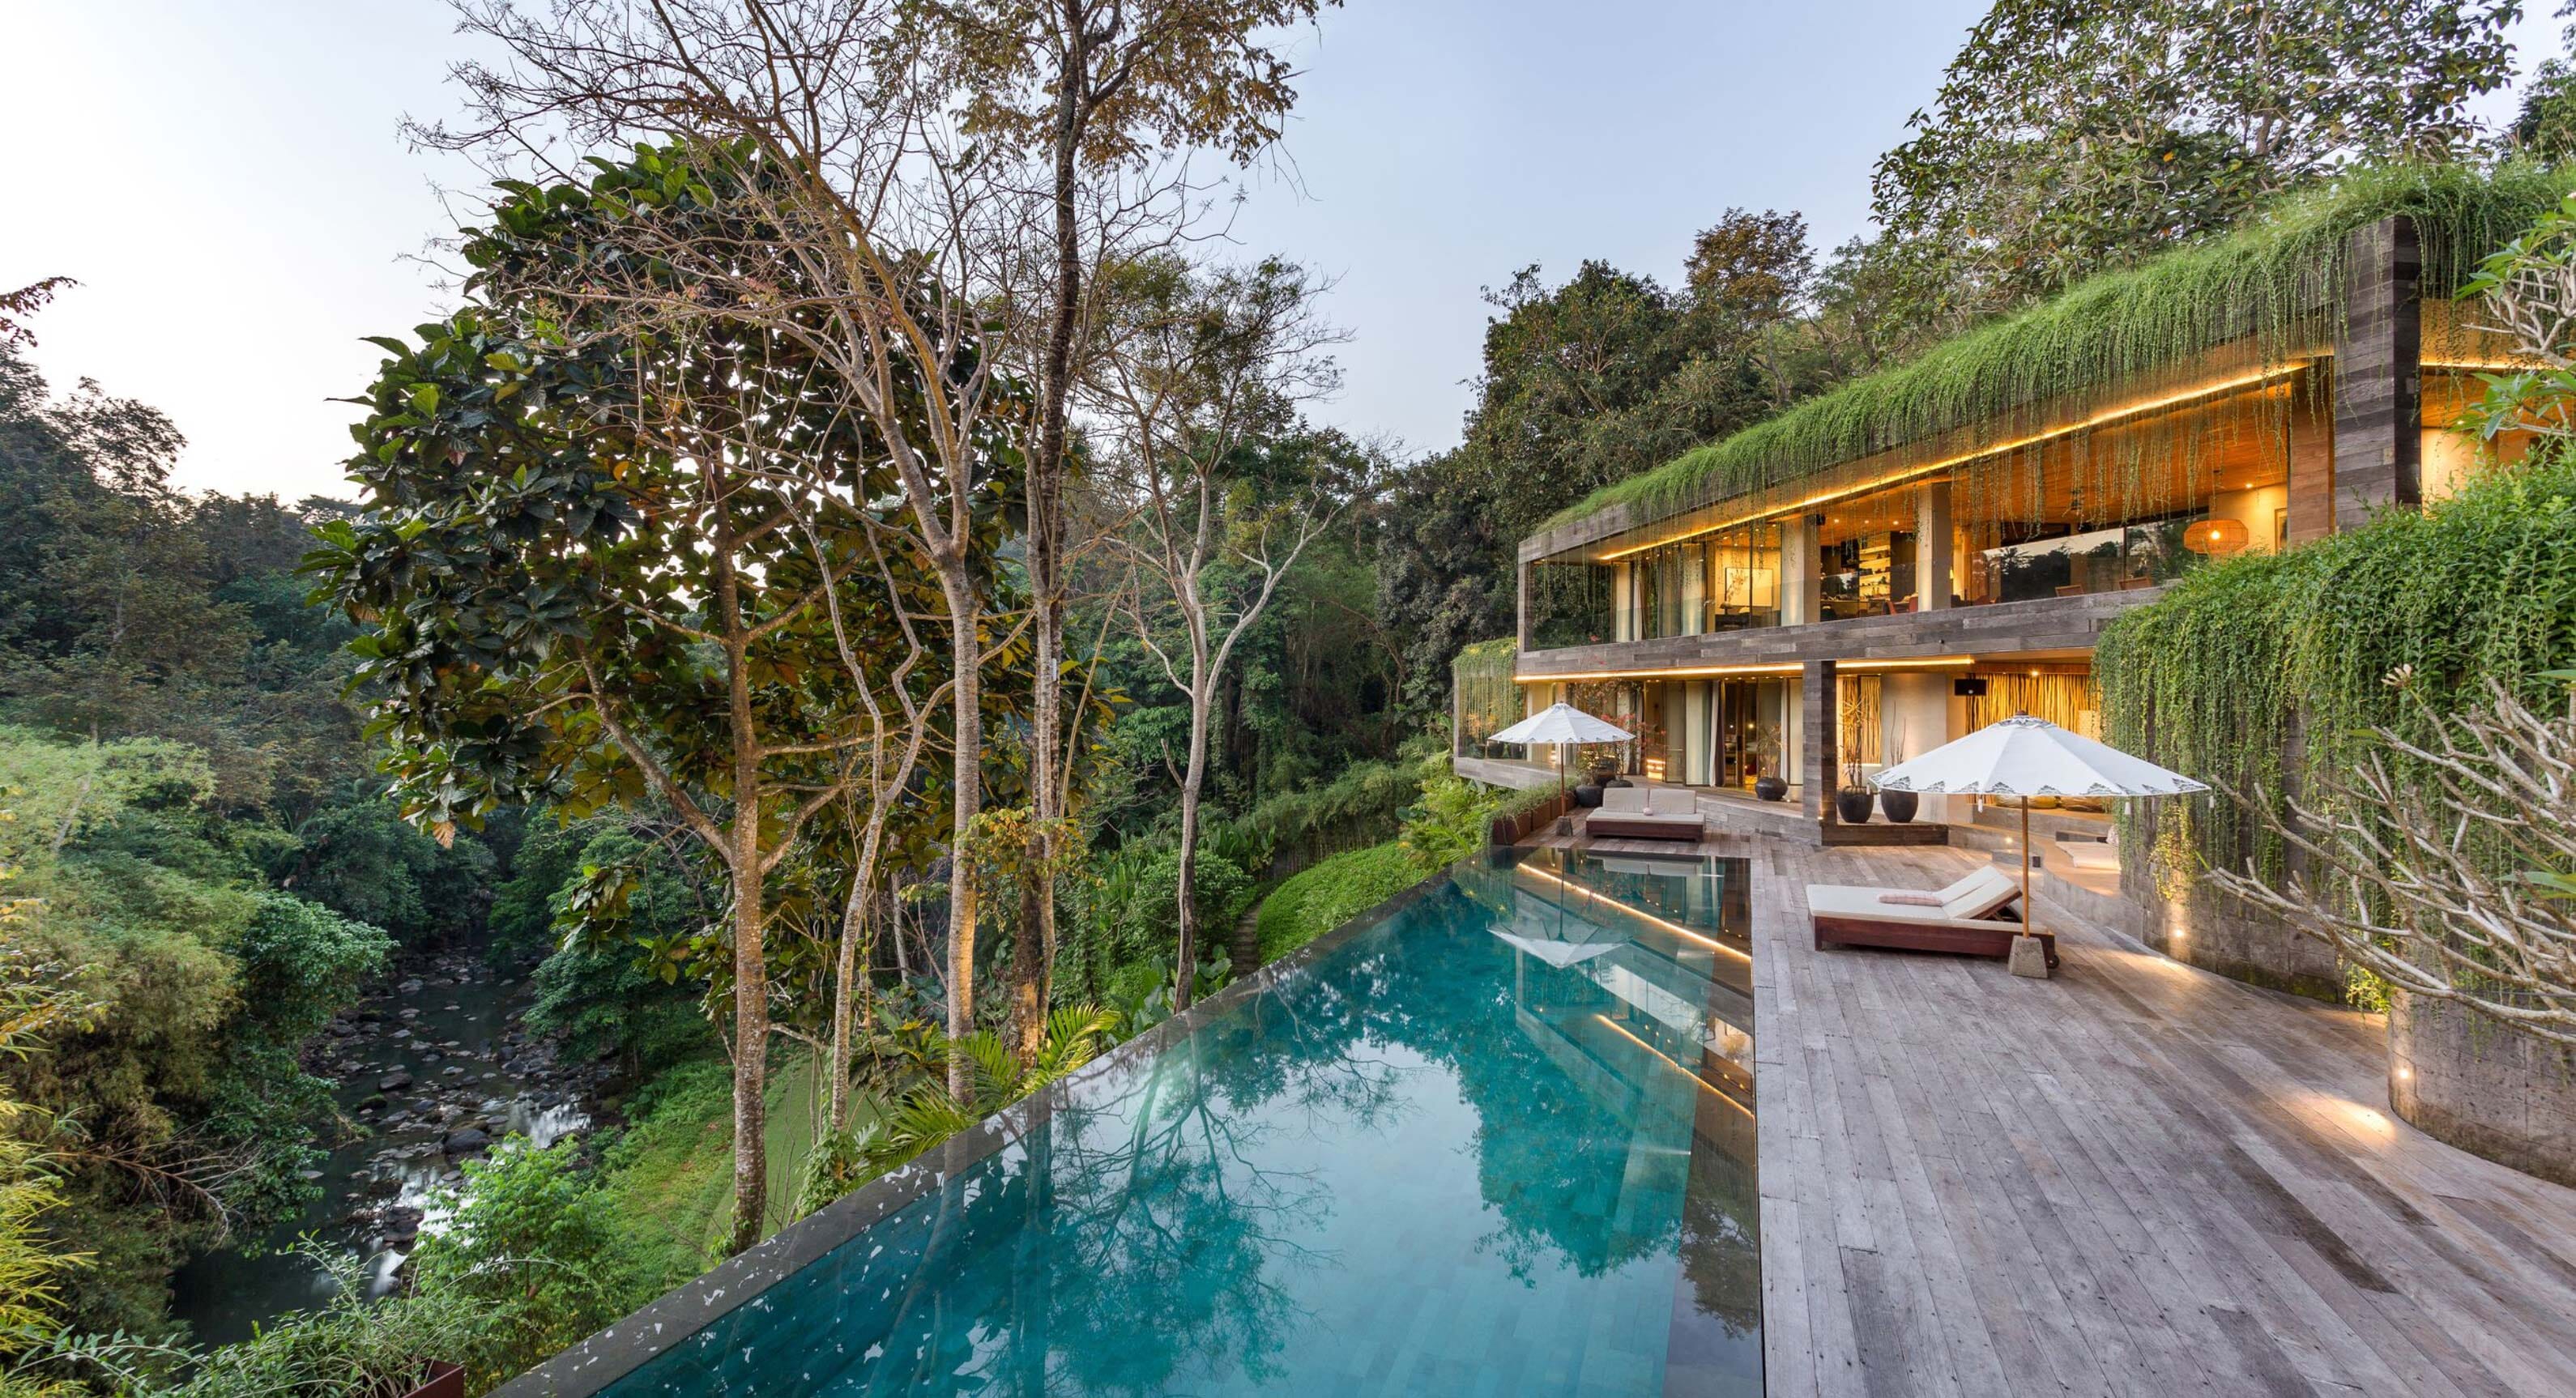 A Mountainside Oasis: The Chameleon Villa In Bali